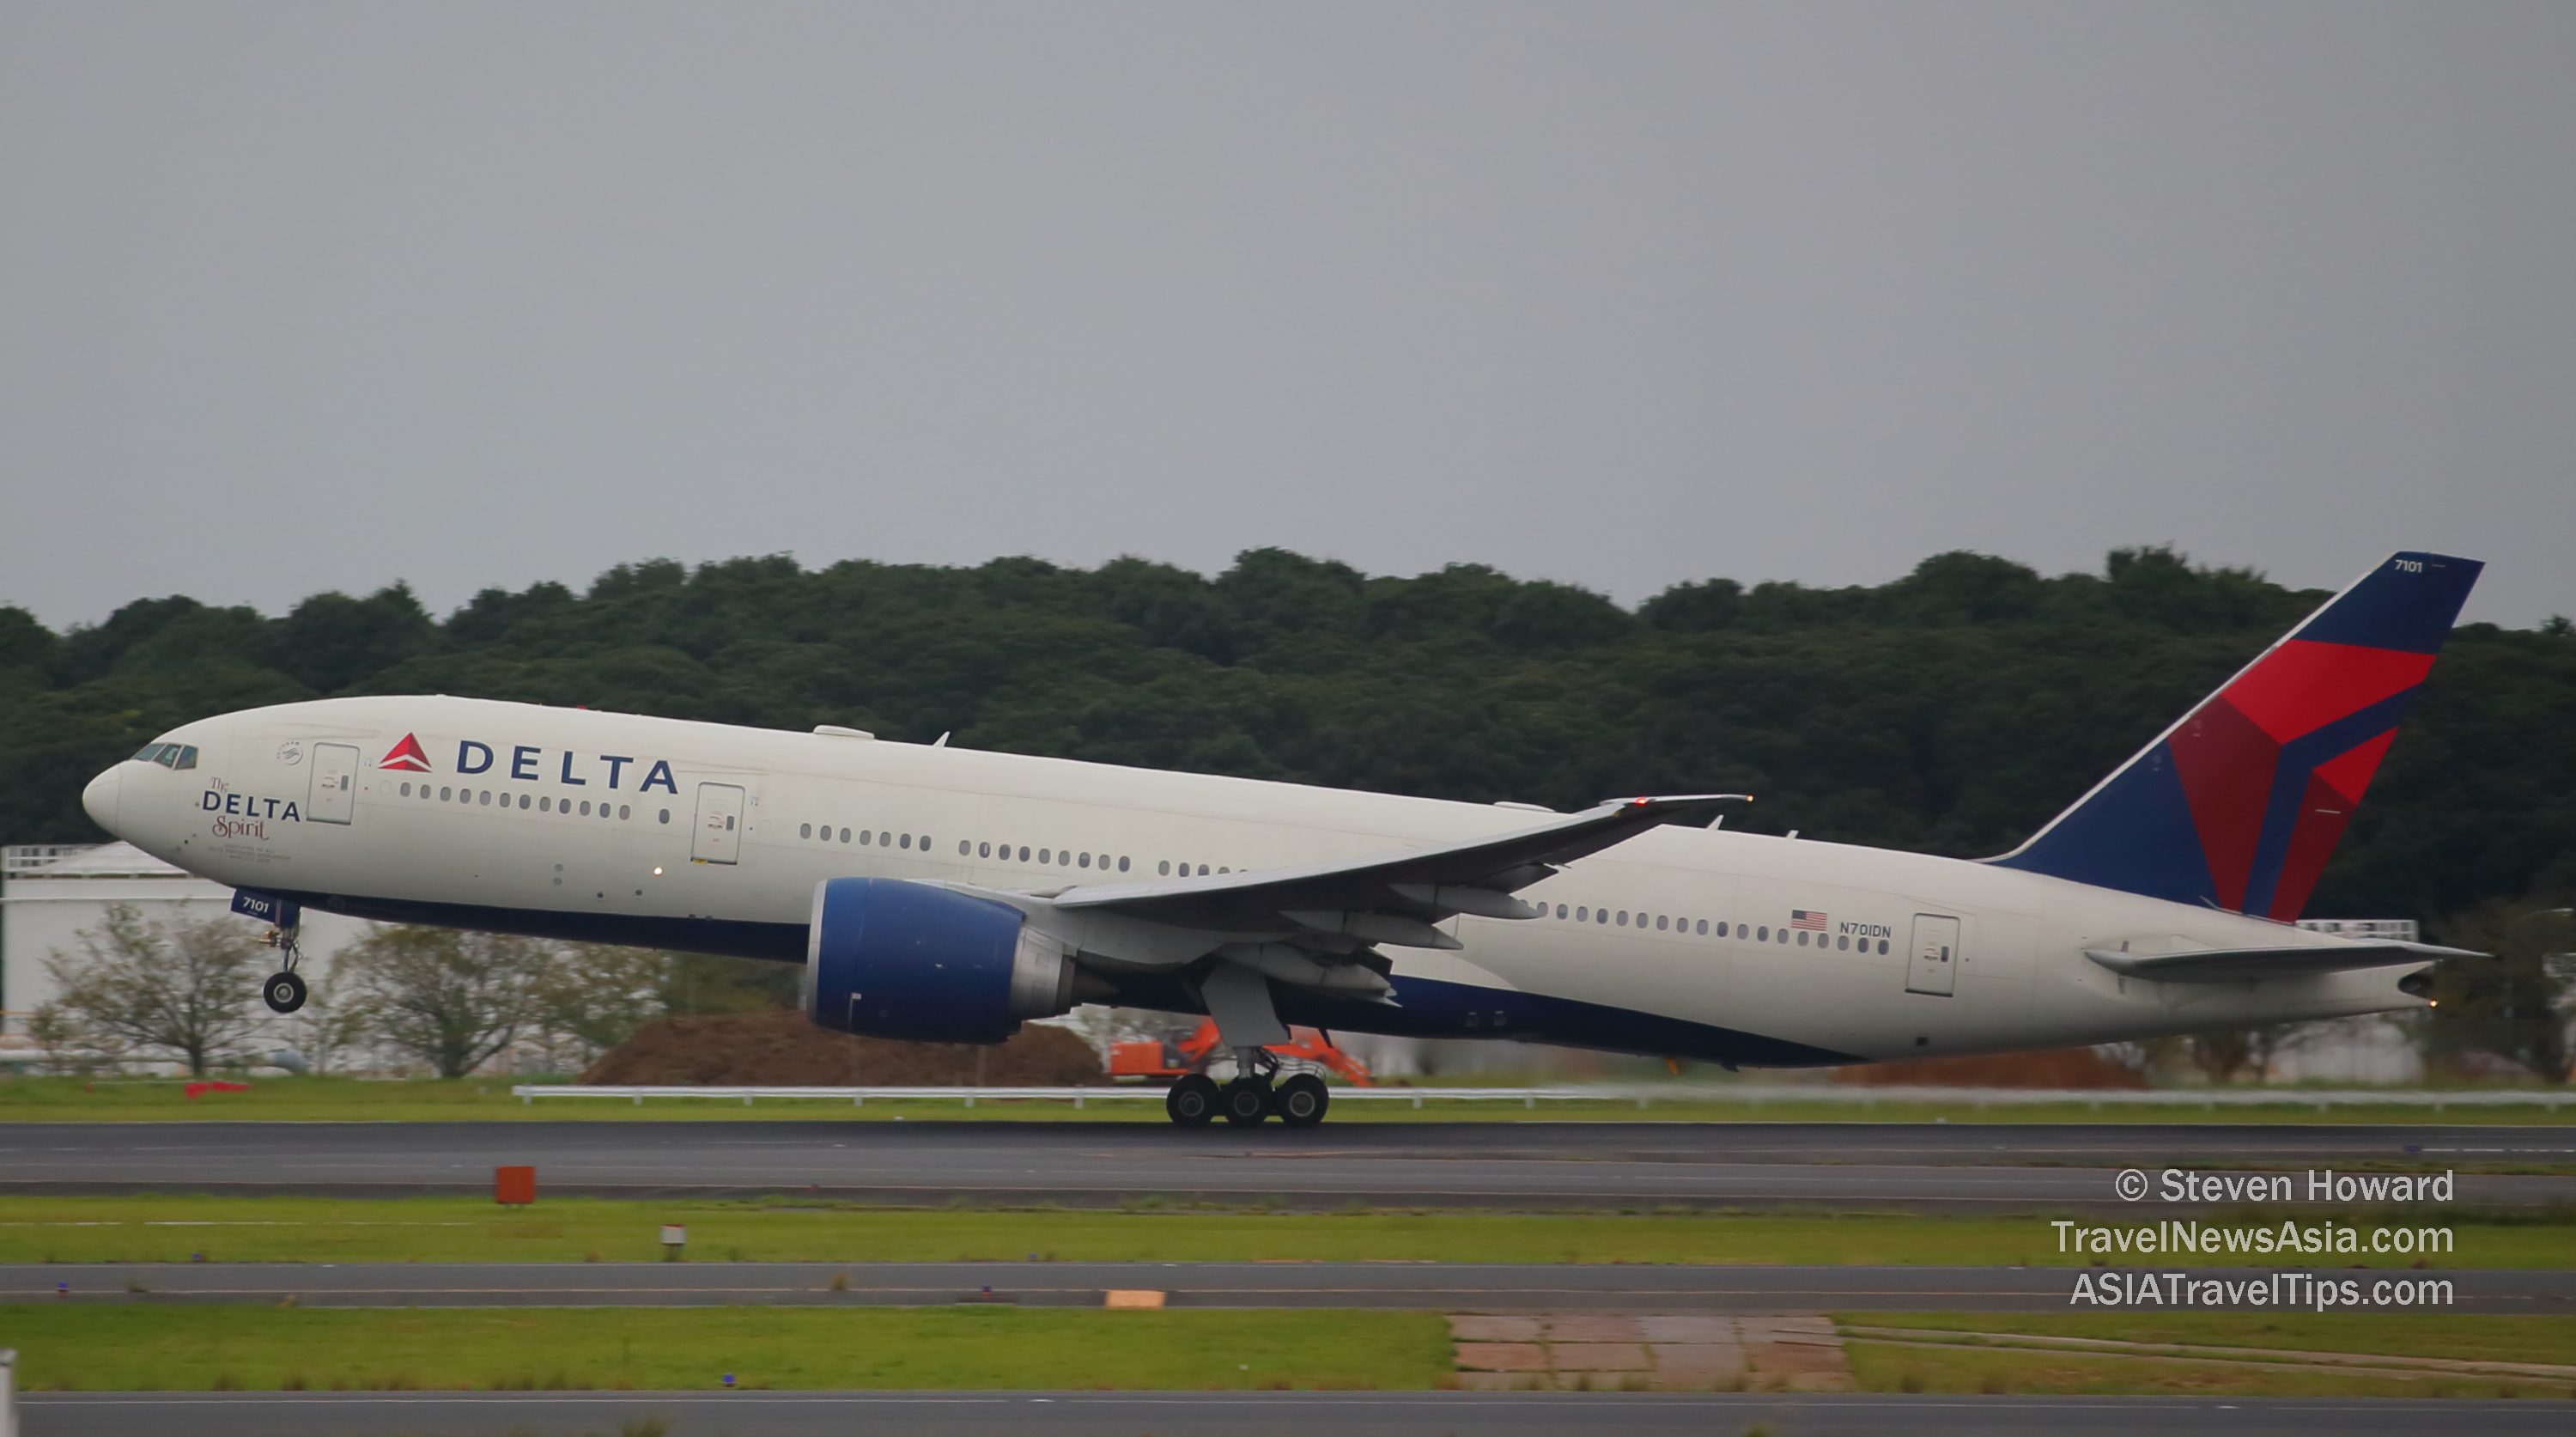 Delta Boeing 777. Picture by Steven Howard of TravelNewsAsia.com Click to enlarge.